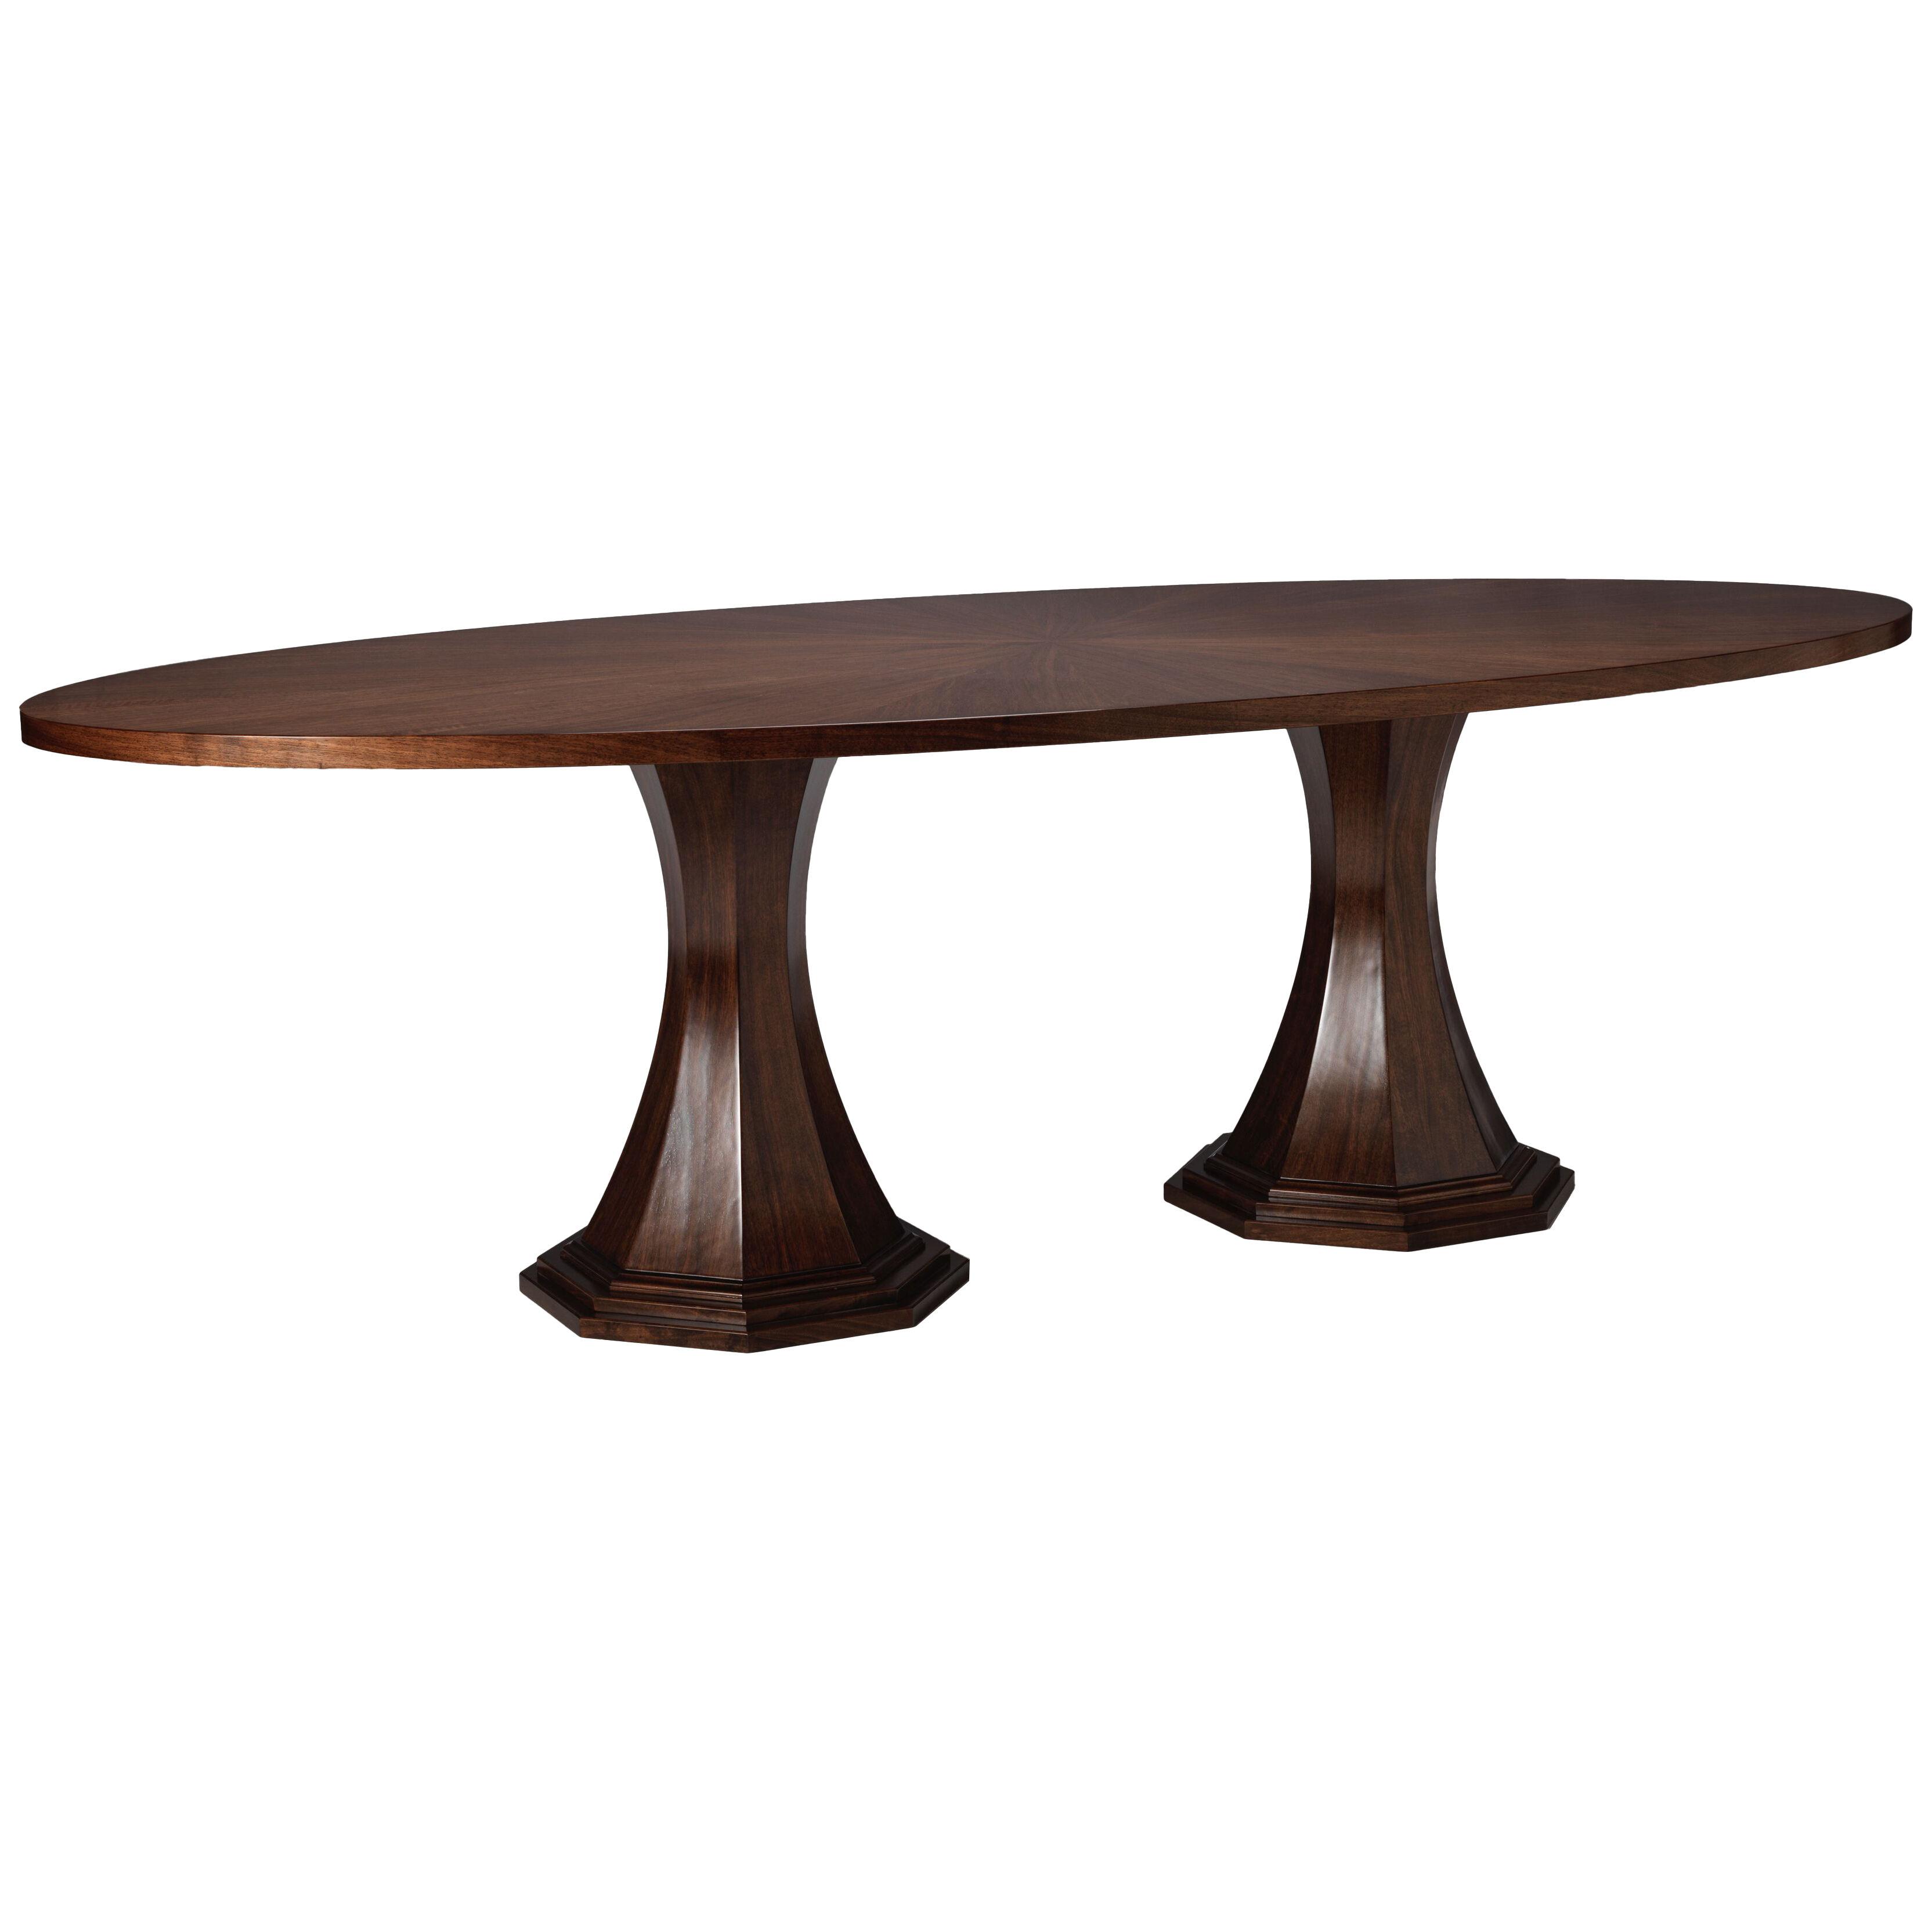 The Antilles Dining Table